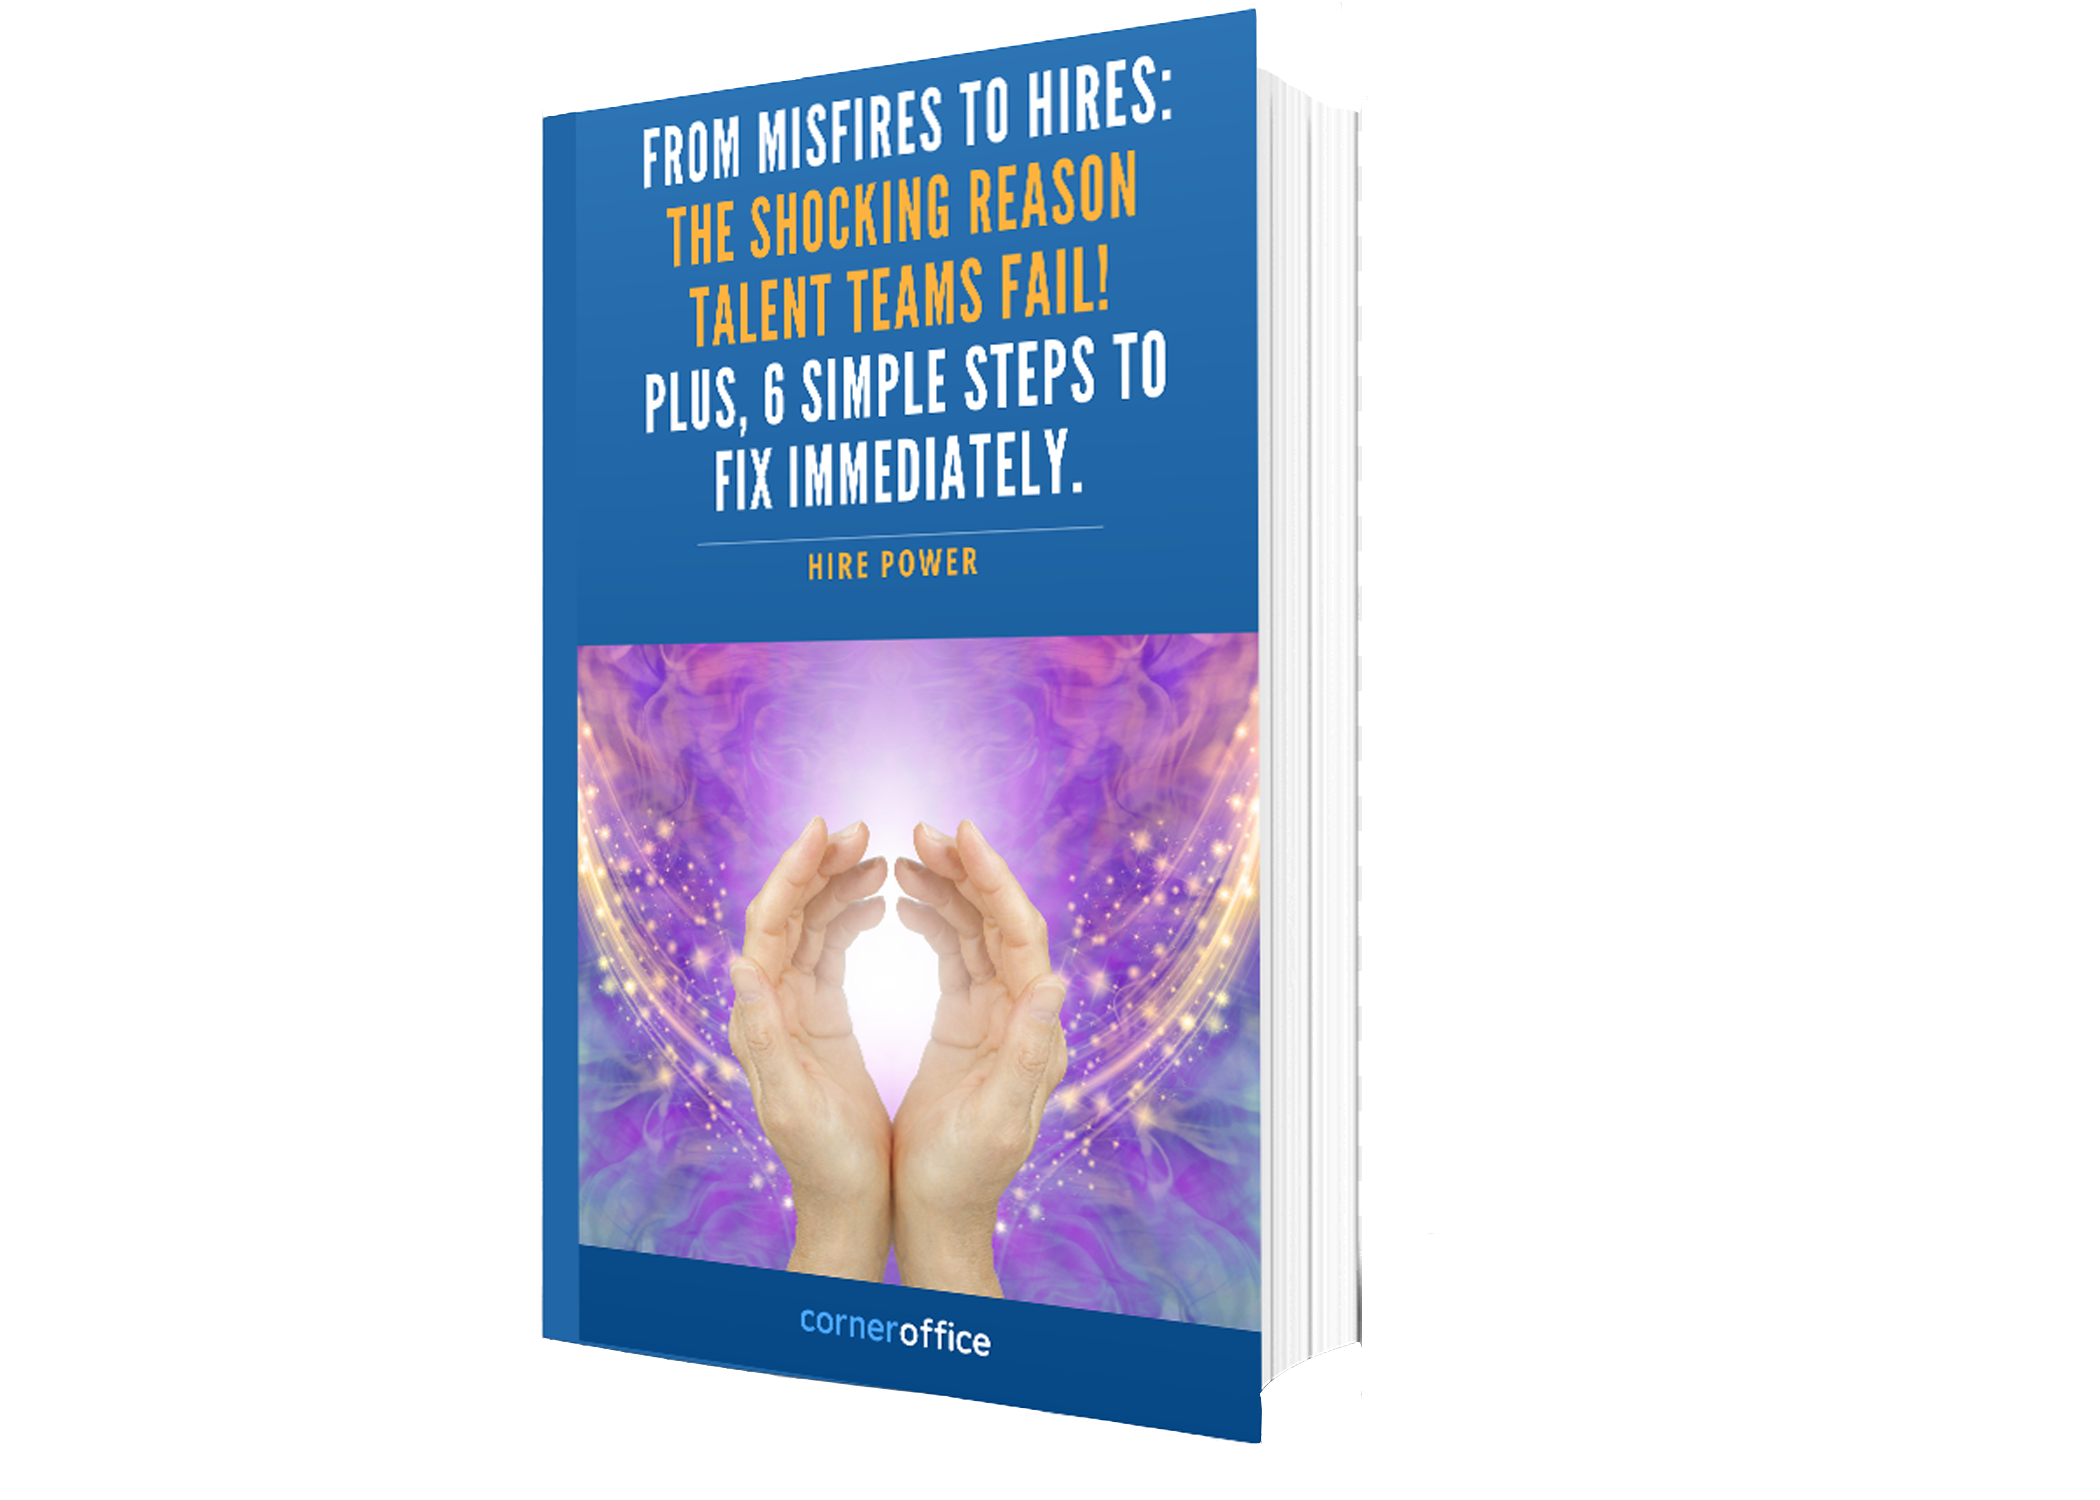 Download FREE eBook - From Misfires to Hires 